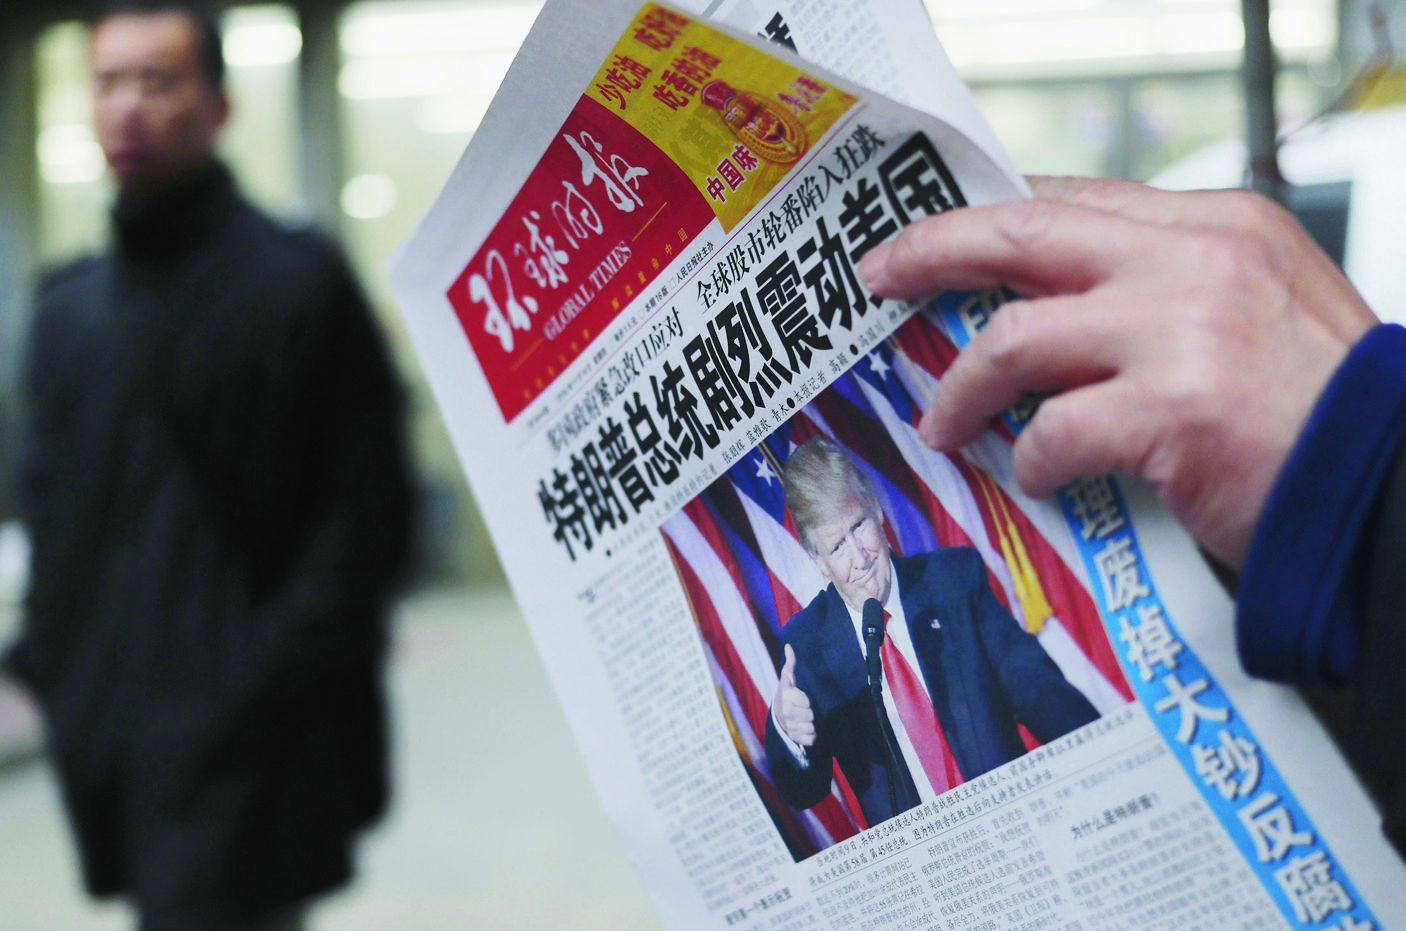 FILE - In this Nov. 10, 2016 file photo, a man reads a newspaper with the headline that reads "U.S. President-elect Donald Trump delivers a mighty shock to America" at a newsstand in Beijing. With Trump's latest tweets touching on sensitive issues, China must decide how to handle an incoming American president who relishes confrontation and whose online statements appear to foreshadow shifts in foreign policy. China awoke Monday, Dec. 5, to criticism from Trump on Twitter, days after it responded to his telephone conversation with Taiwan's president by accusing the Taiwanese of playing a "little trick" on Trump. (AP Photo/Andy Wong, File) CHINA REACTING TO TRUMP